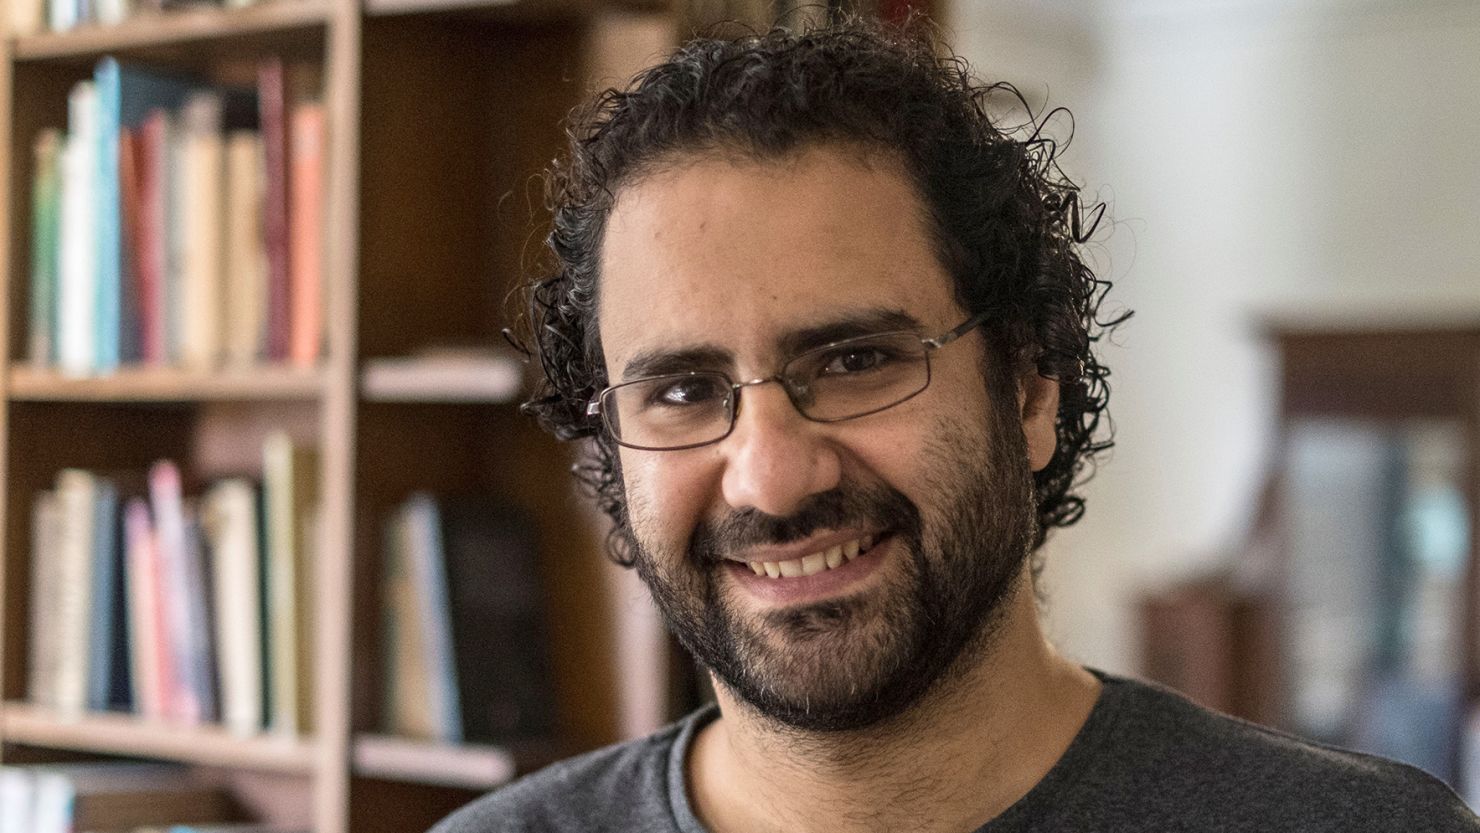 Egyptian activist and blogger Alaa Abd El-Fattah gives an interview at his home in Cairo on May 17, 2019.